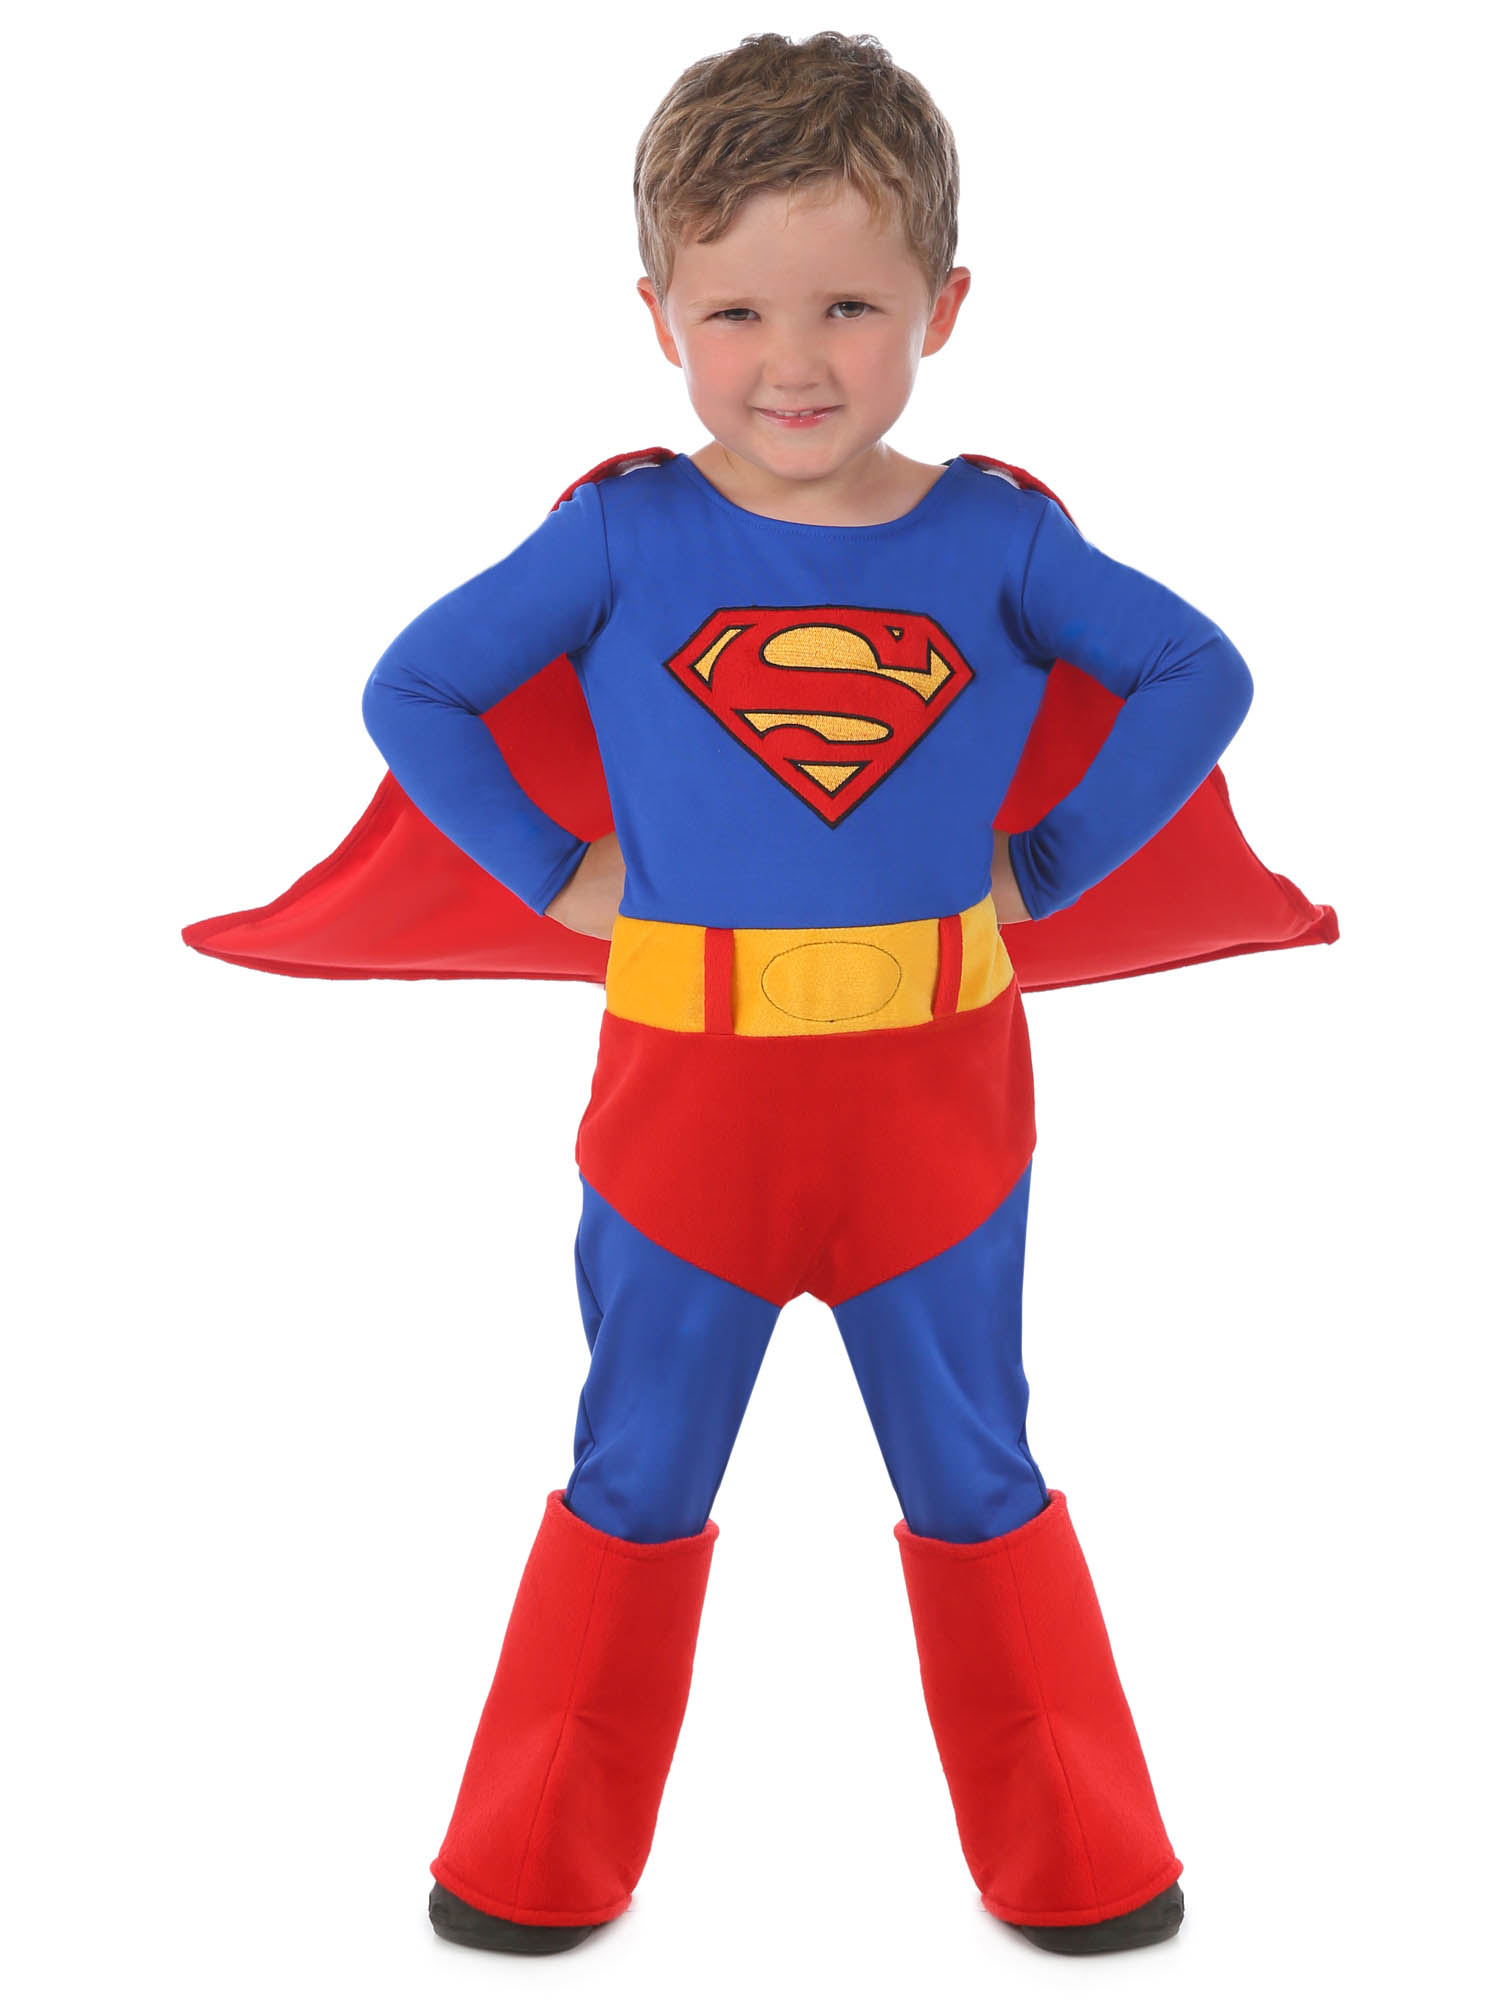 Toddler Superman Cuddly Costume Costume - PartyBell.com